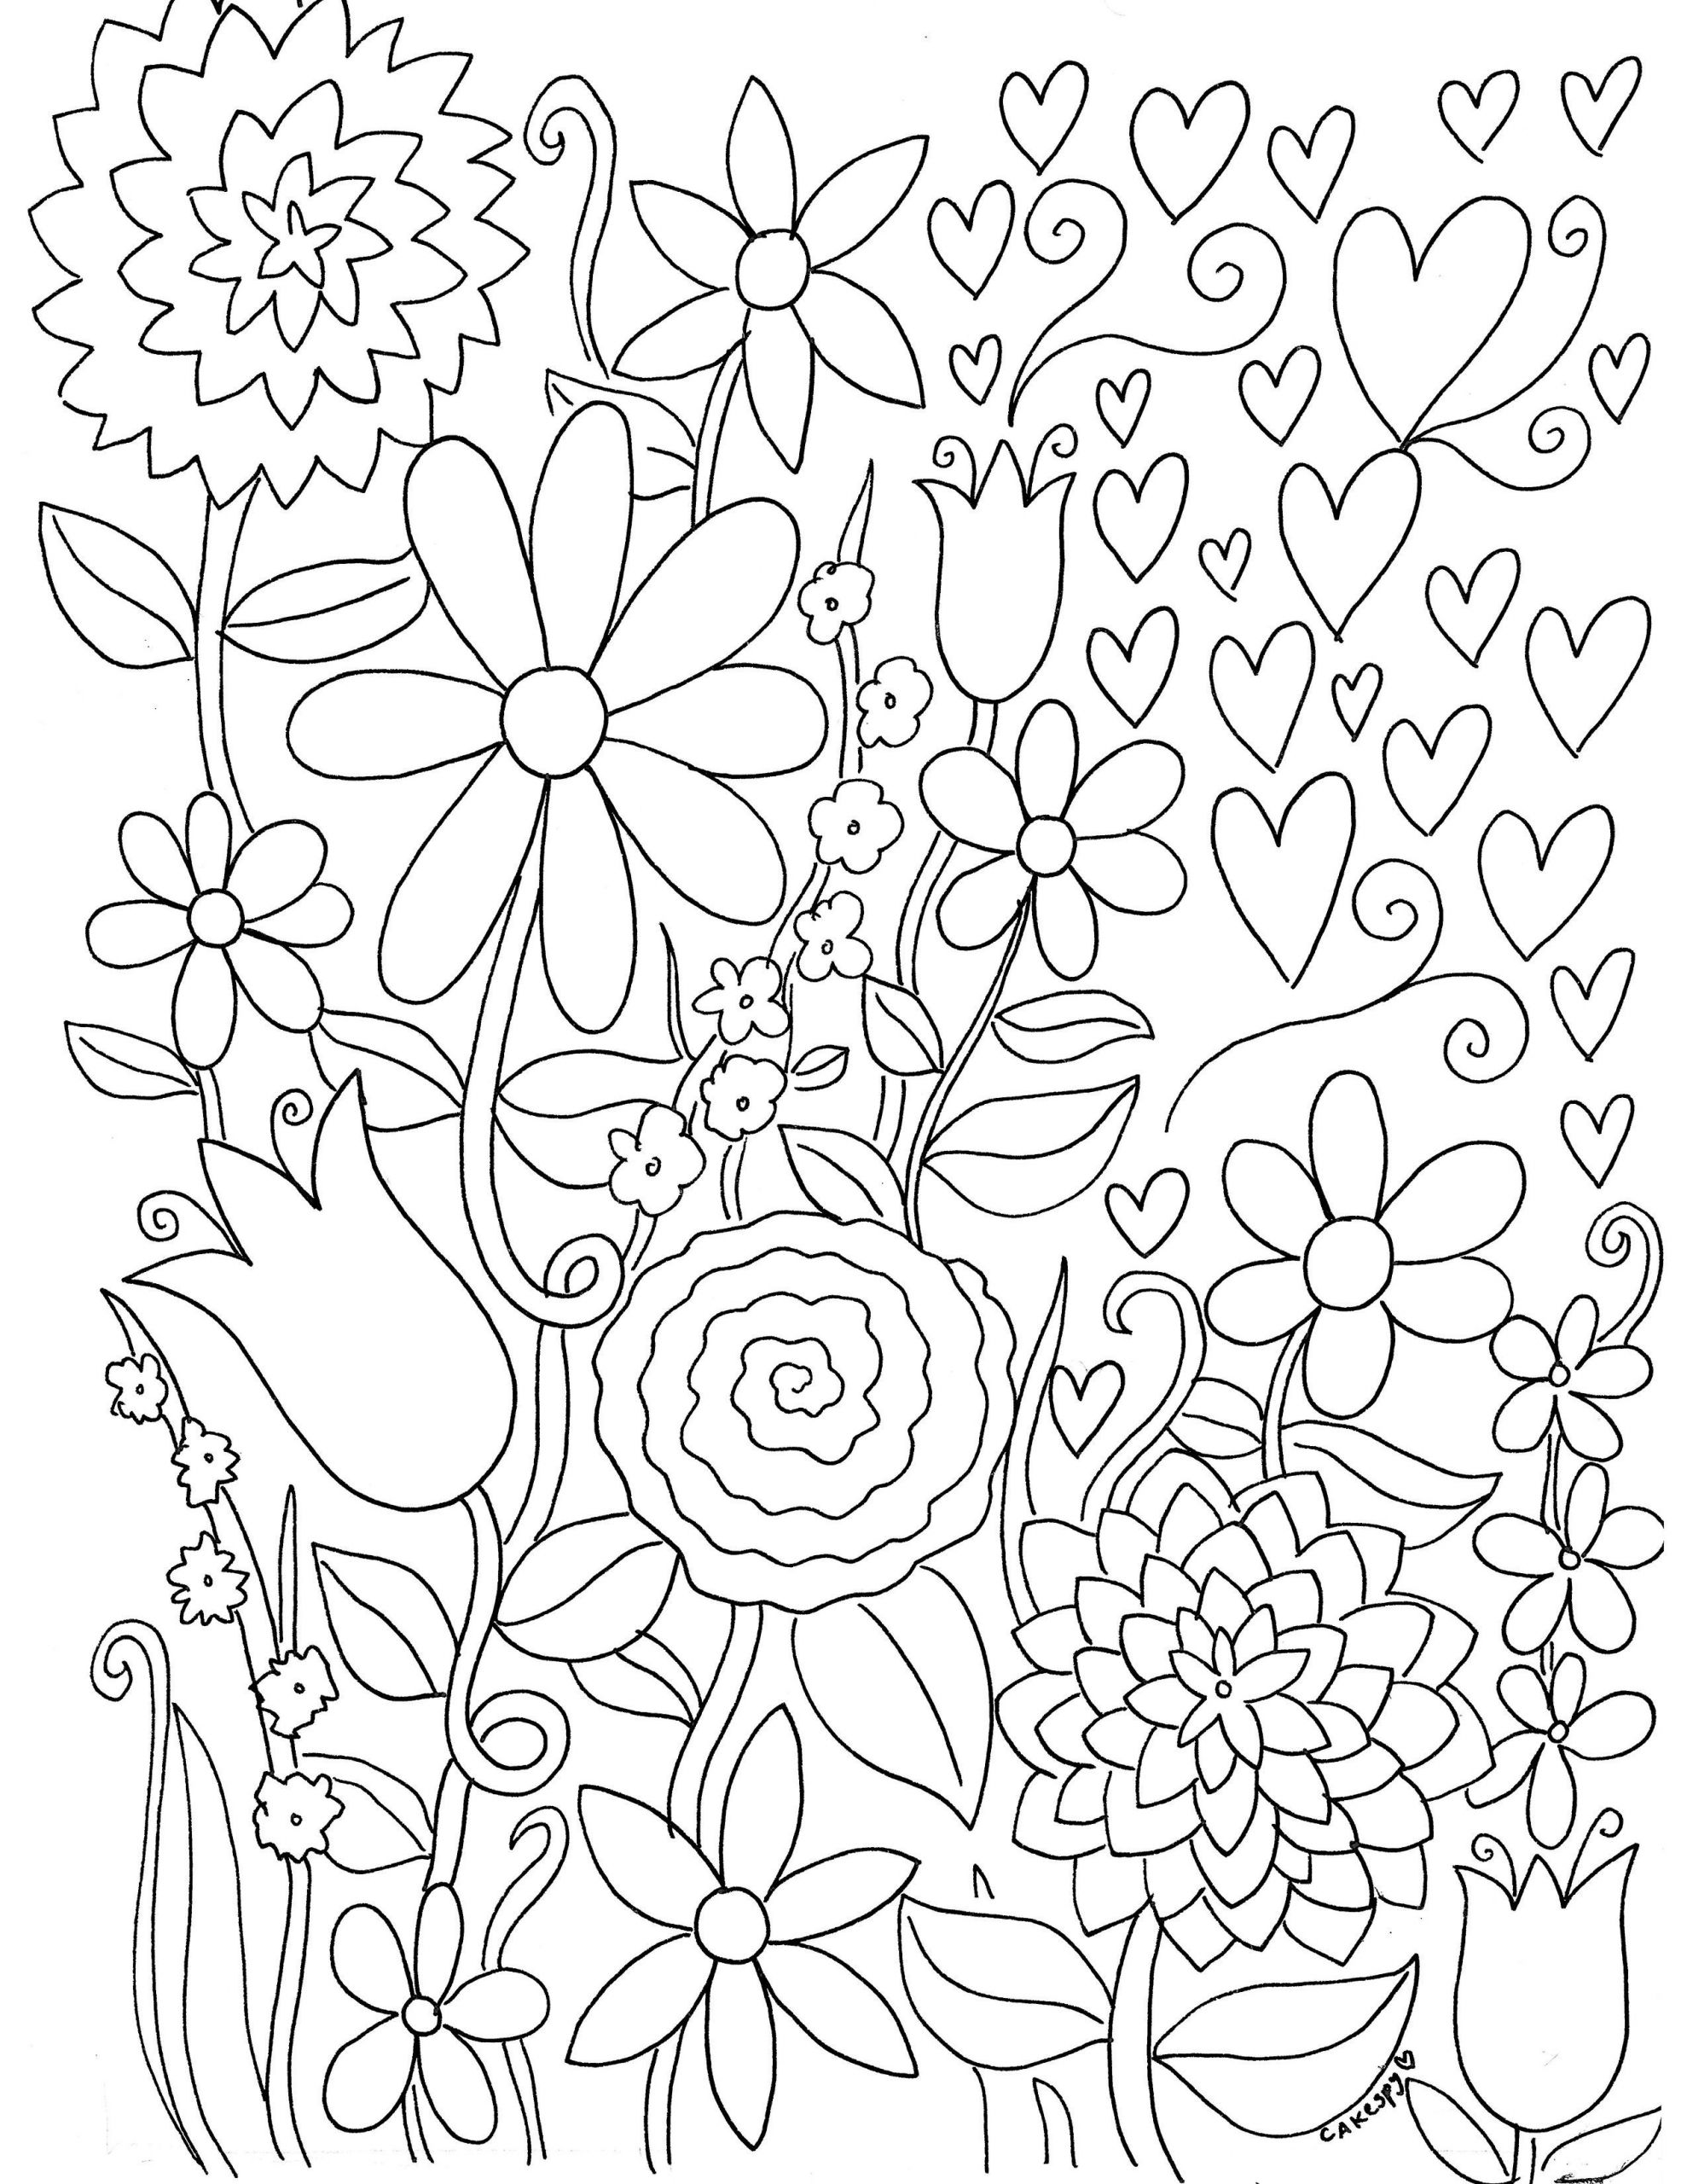 New Coloring Book For Adults
 FREE Paint by Numbers for Adults Downloadable